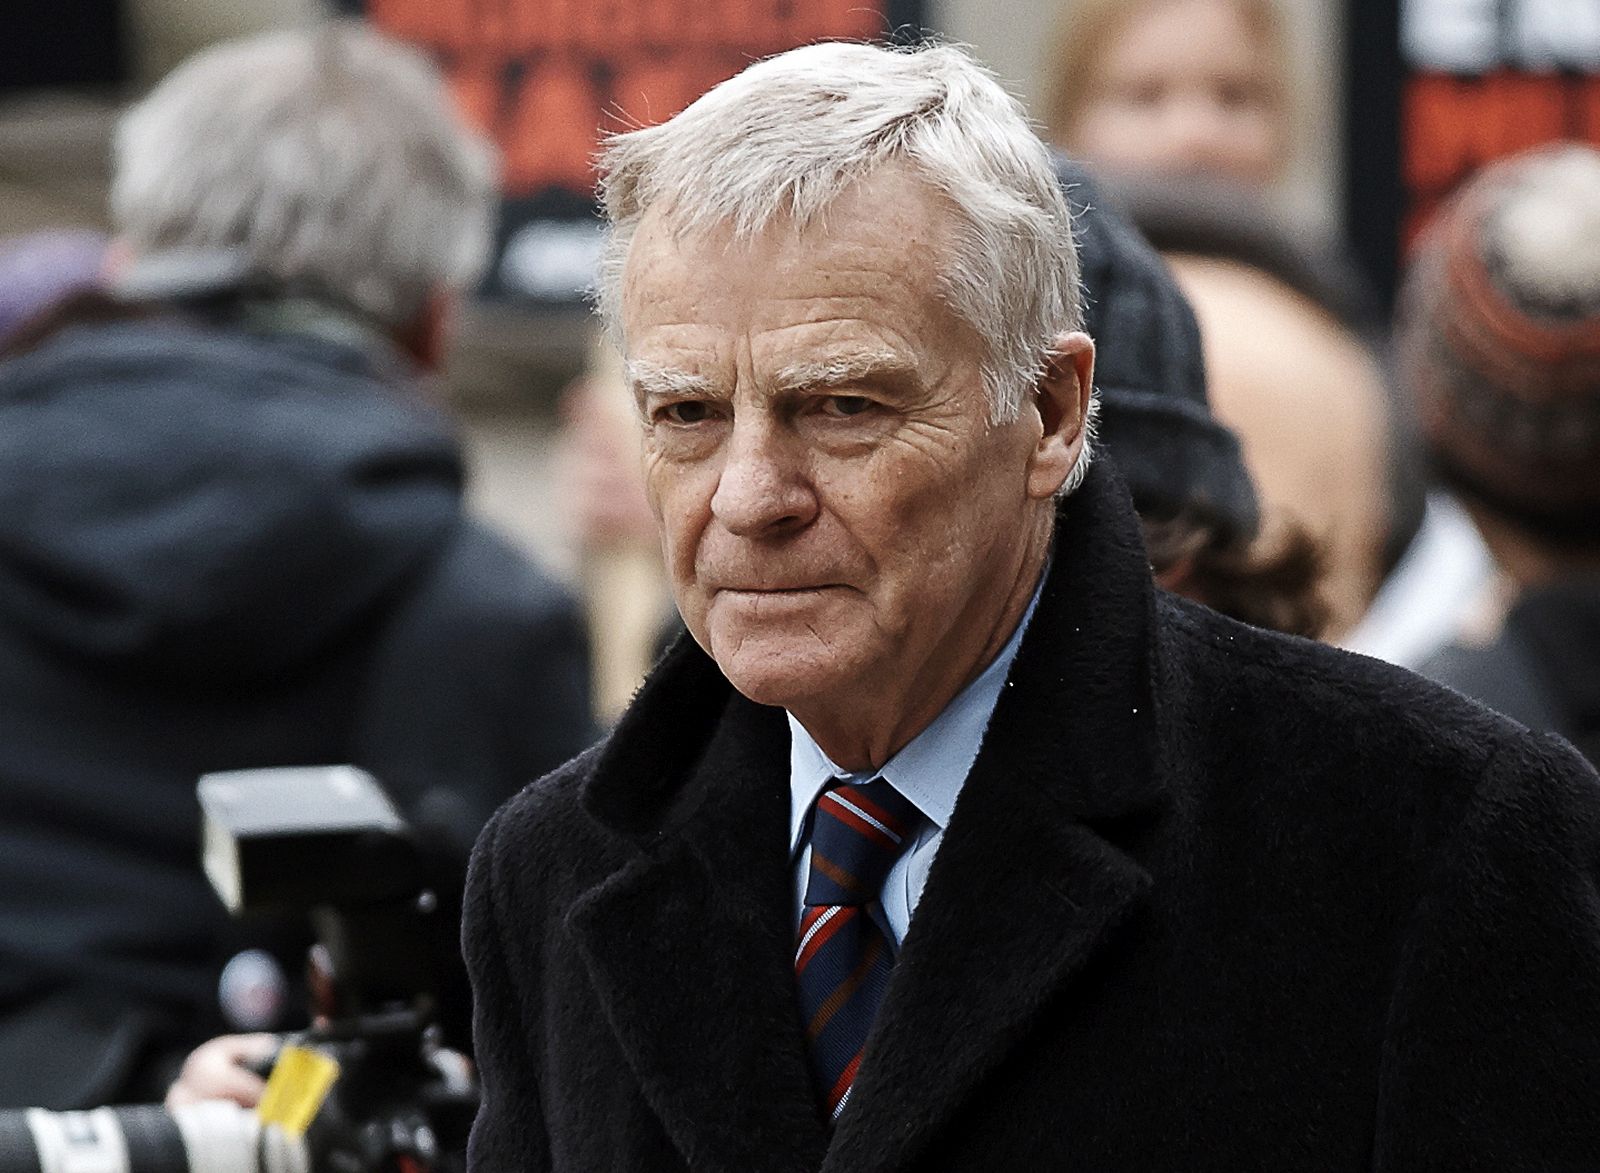 epa09225234 (FILE) - Former FIA President Max Mosley (C) arrives at the Queen Elizabeth II conference center in central London, England on 29 November 2012, re-issued 24 May 2021. Max Mosley, former race driver and long-time FIA (International Automobile Federation) President, has died at the age of 81 as media reports on 24 May 2021.  EPA/KERIM OKTEN